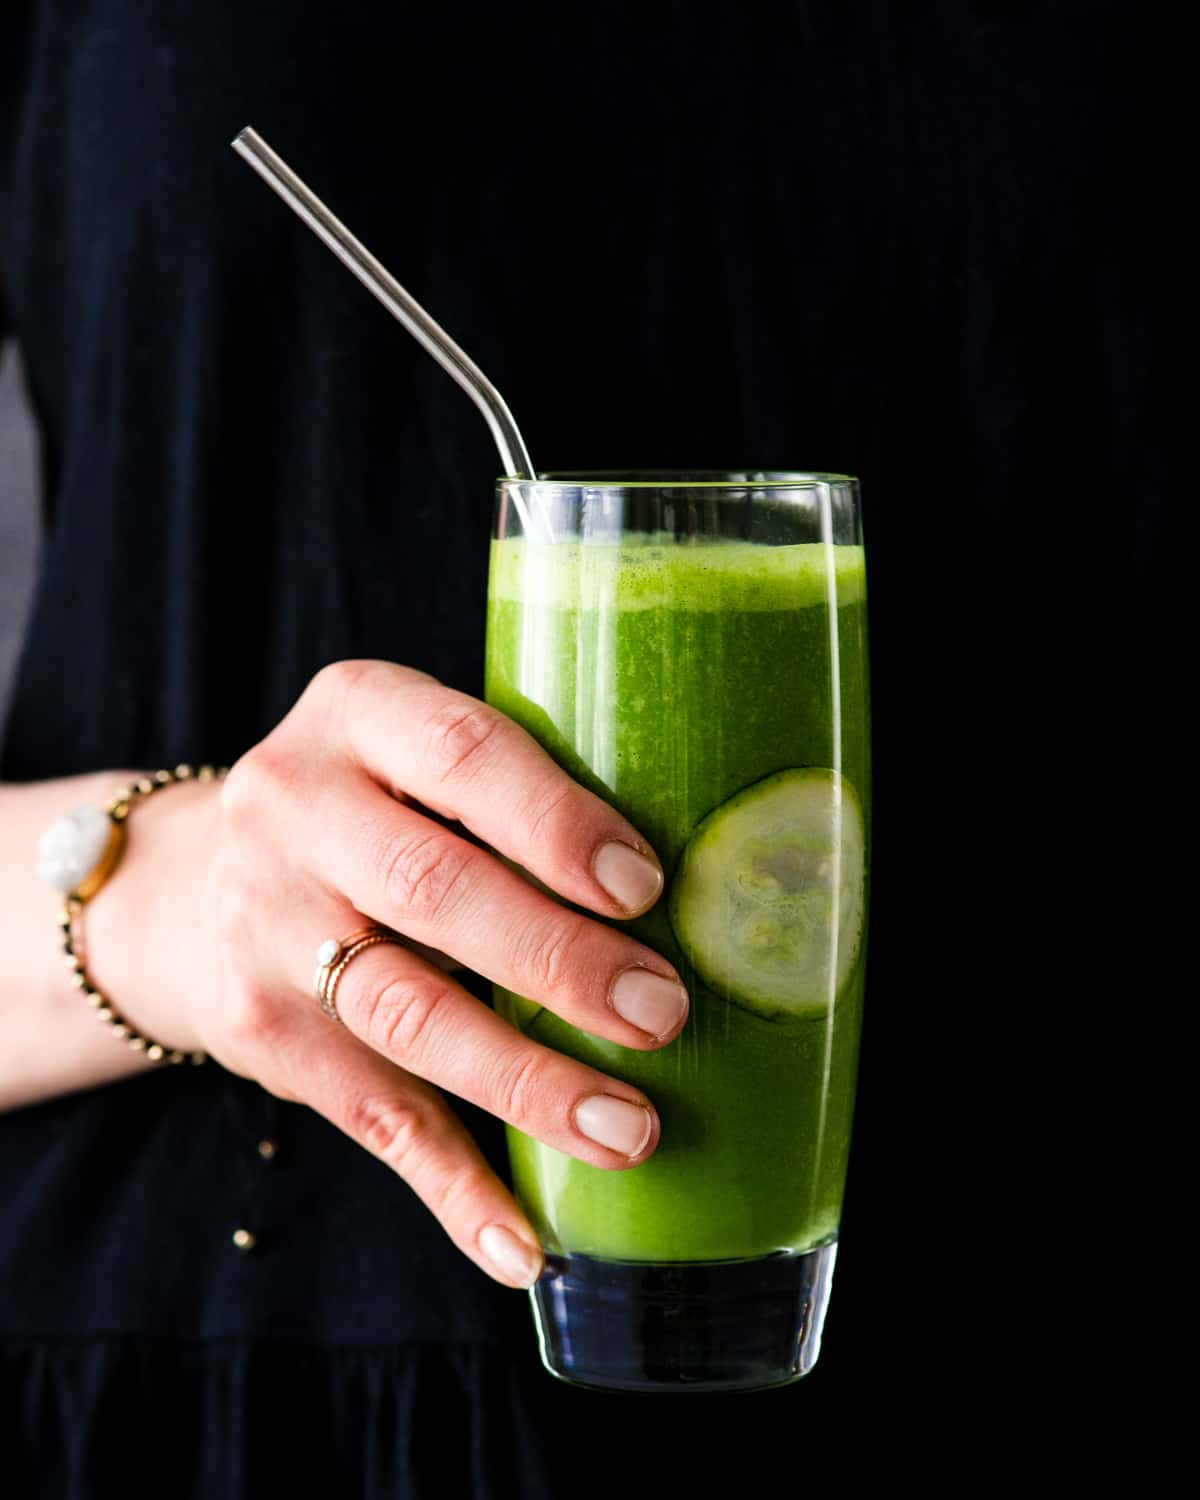 Front view of a hand holding a Zucchini Smoothie